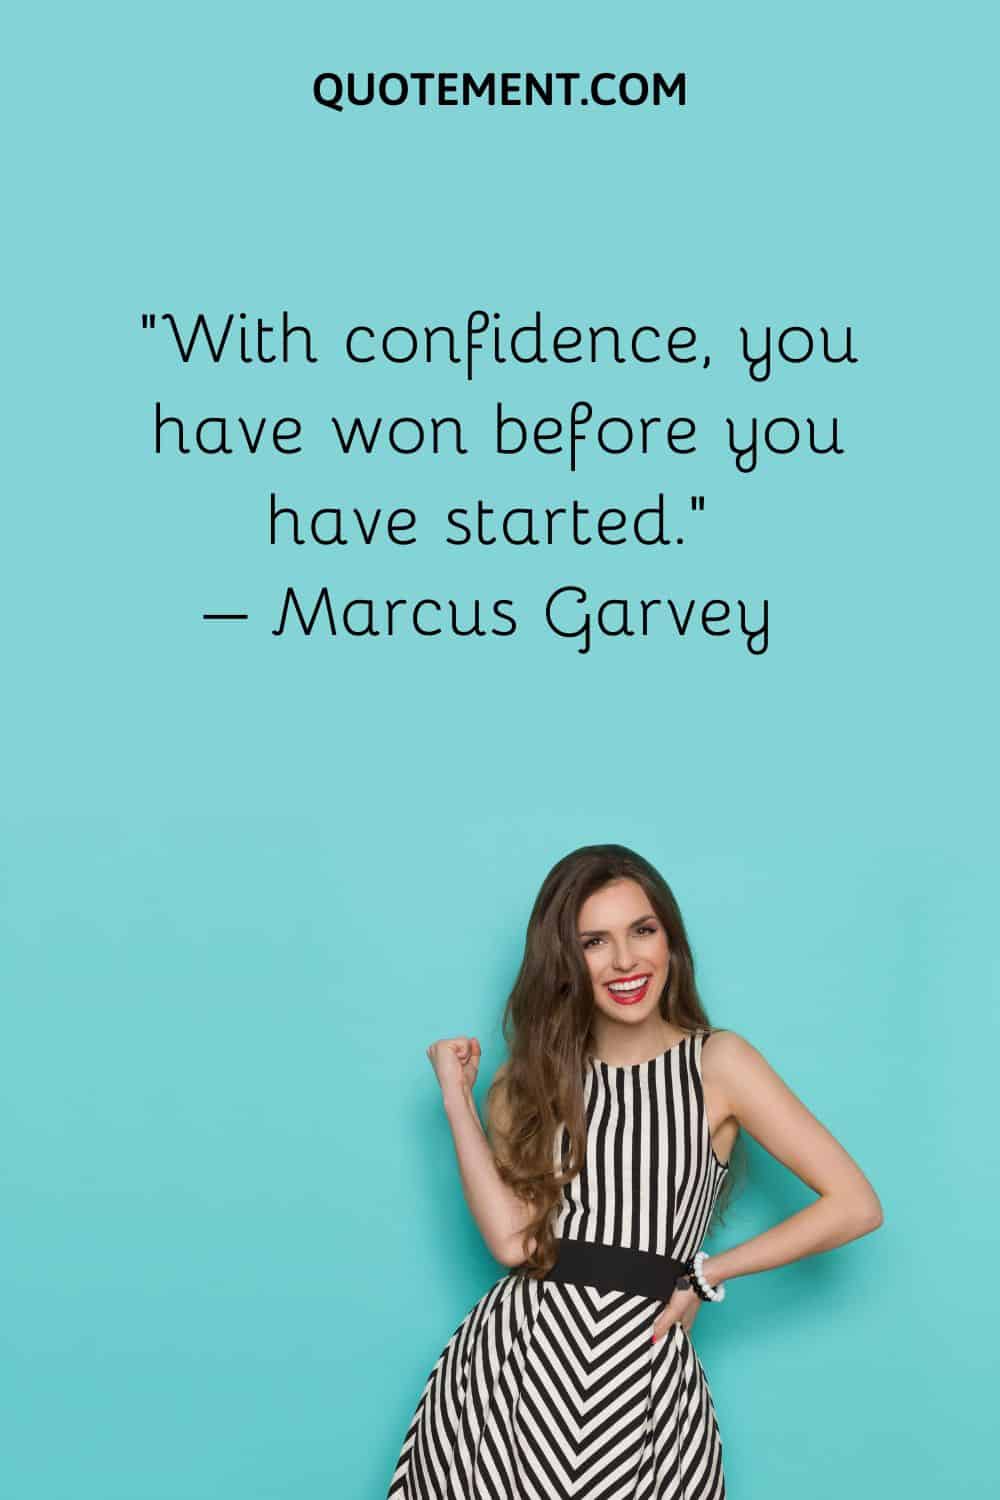 With confidence, you have won before you have started